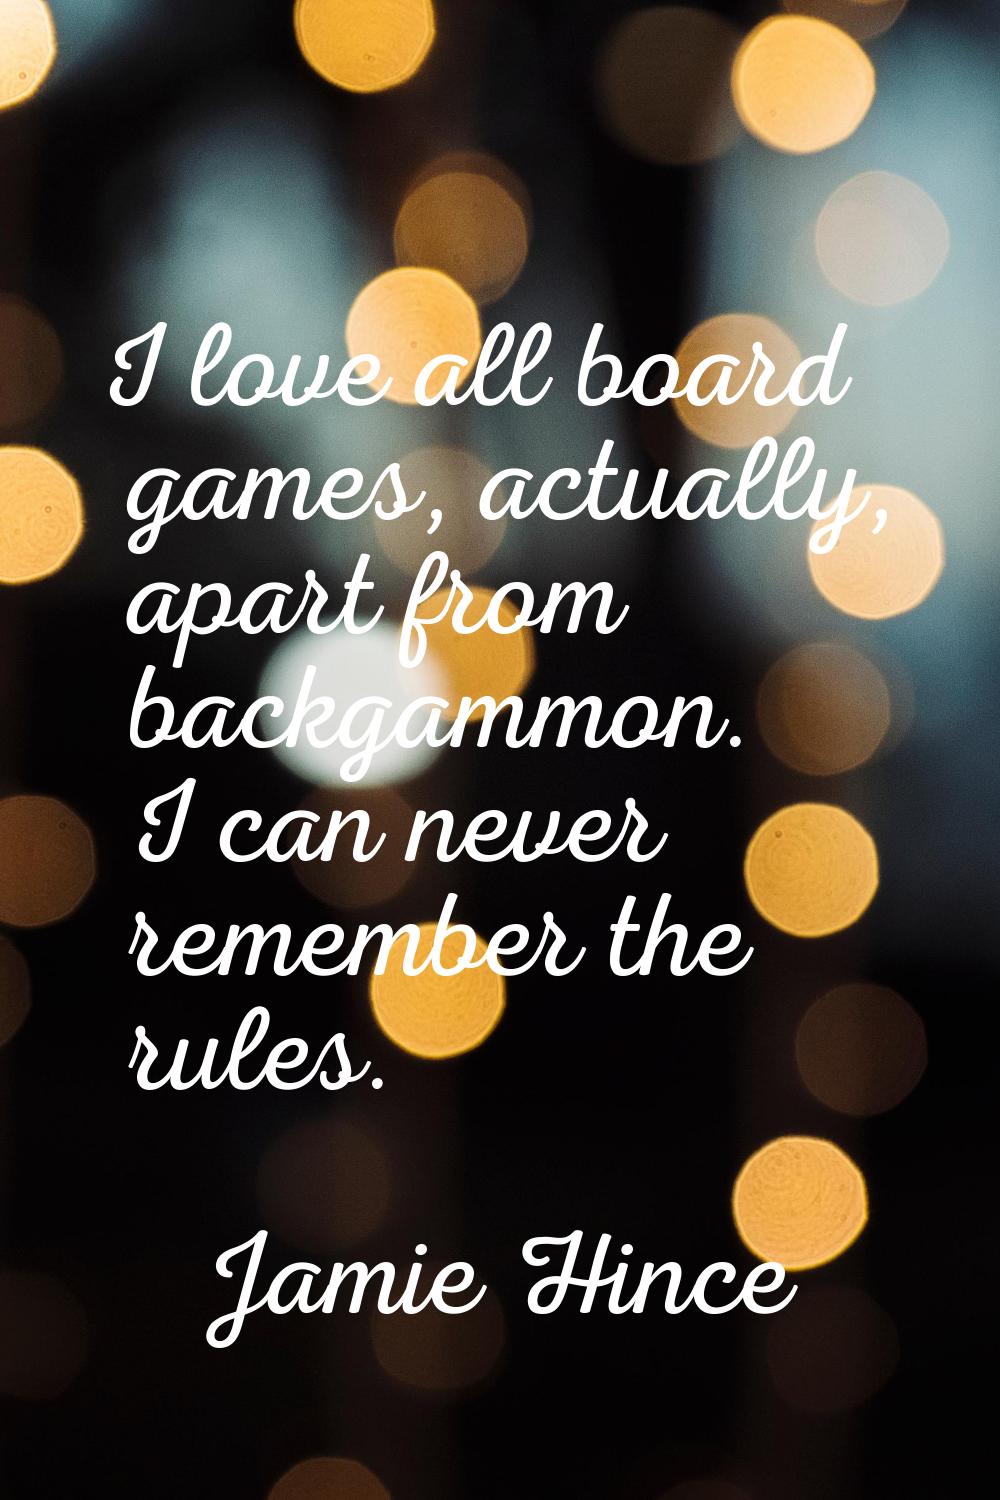 I love all board games, actually, apart from backgammon. I can never remember the rules.